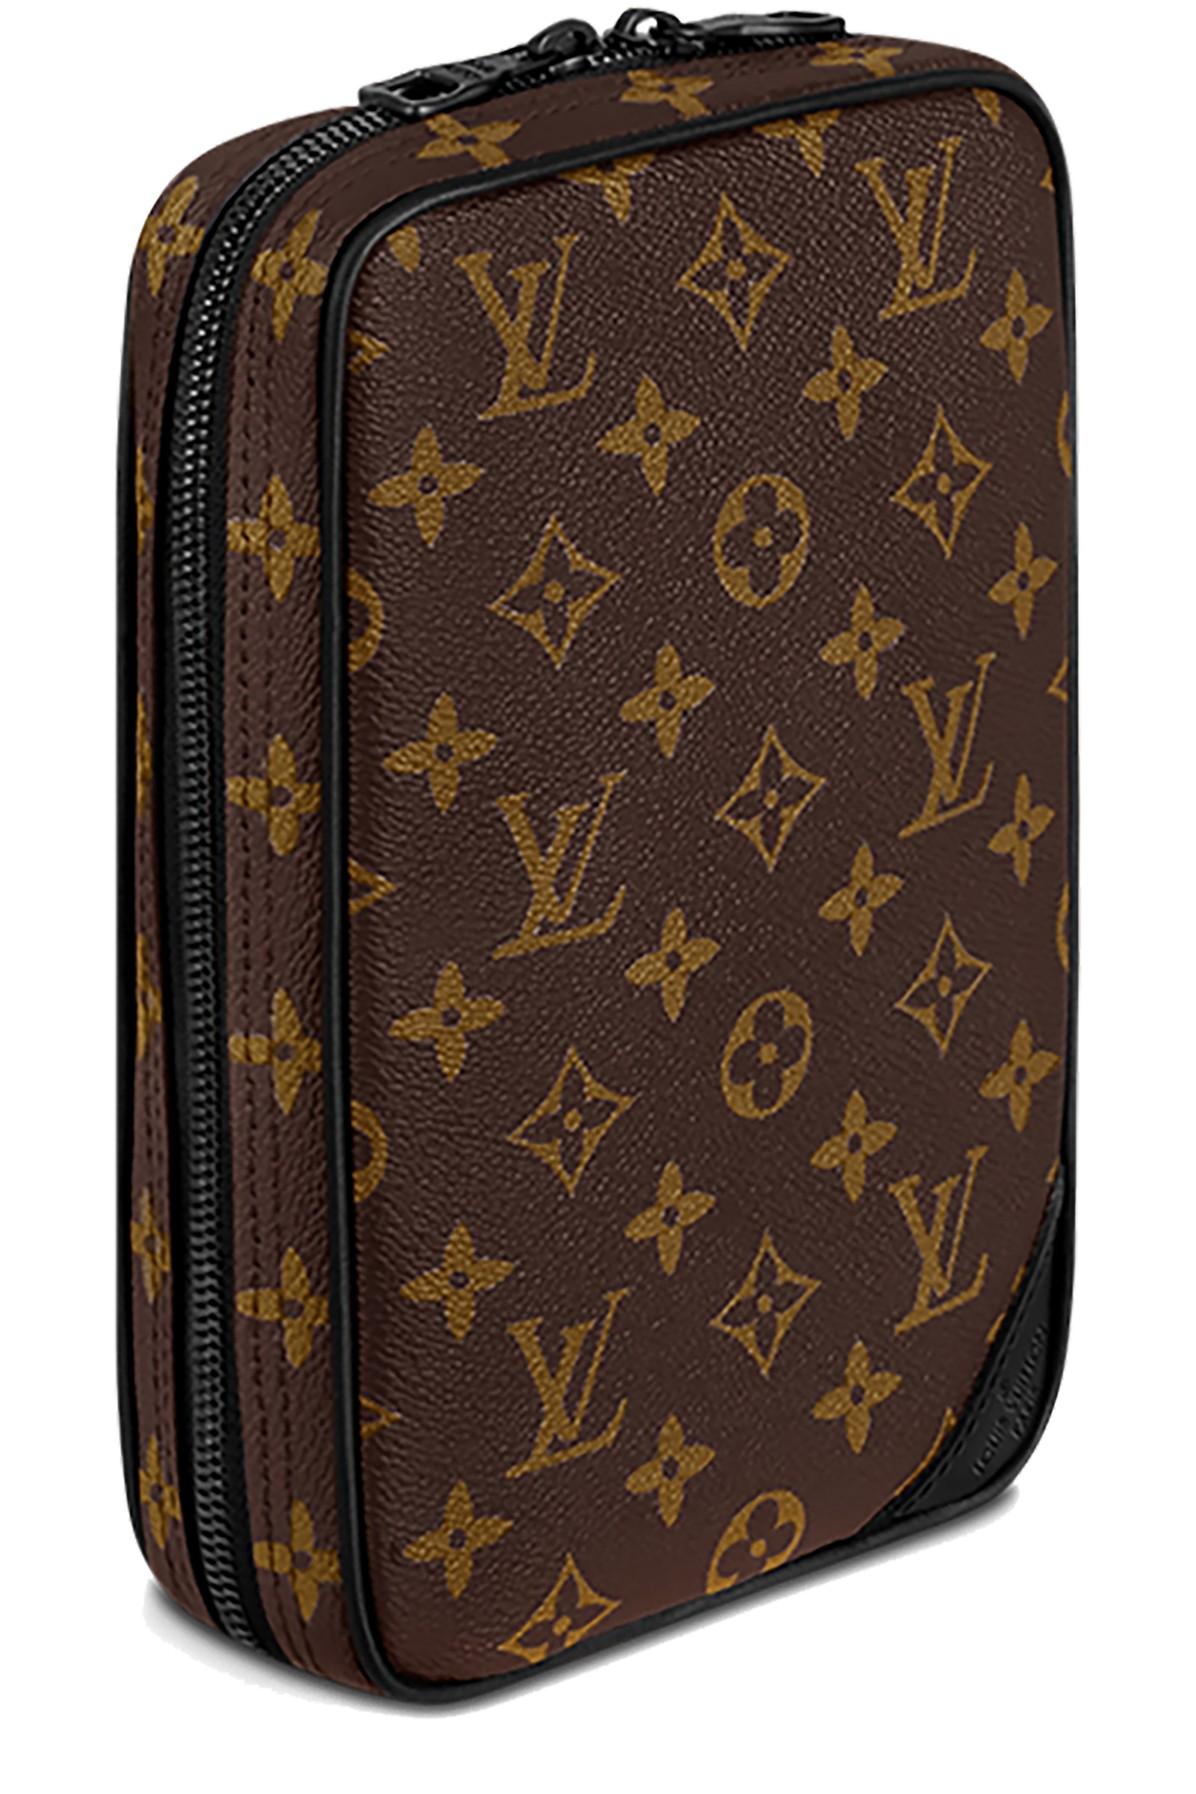 Spotted while shopping on Poshmark: Louis Vuitton Utility Side Bag